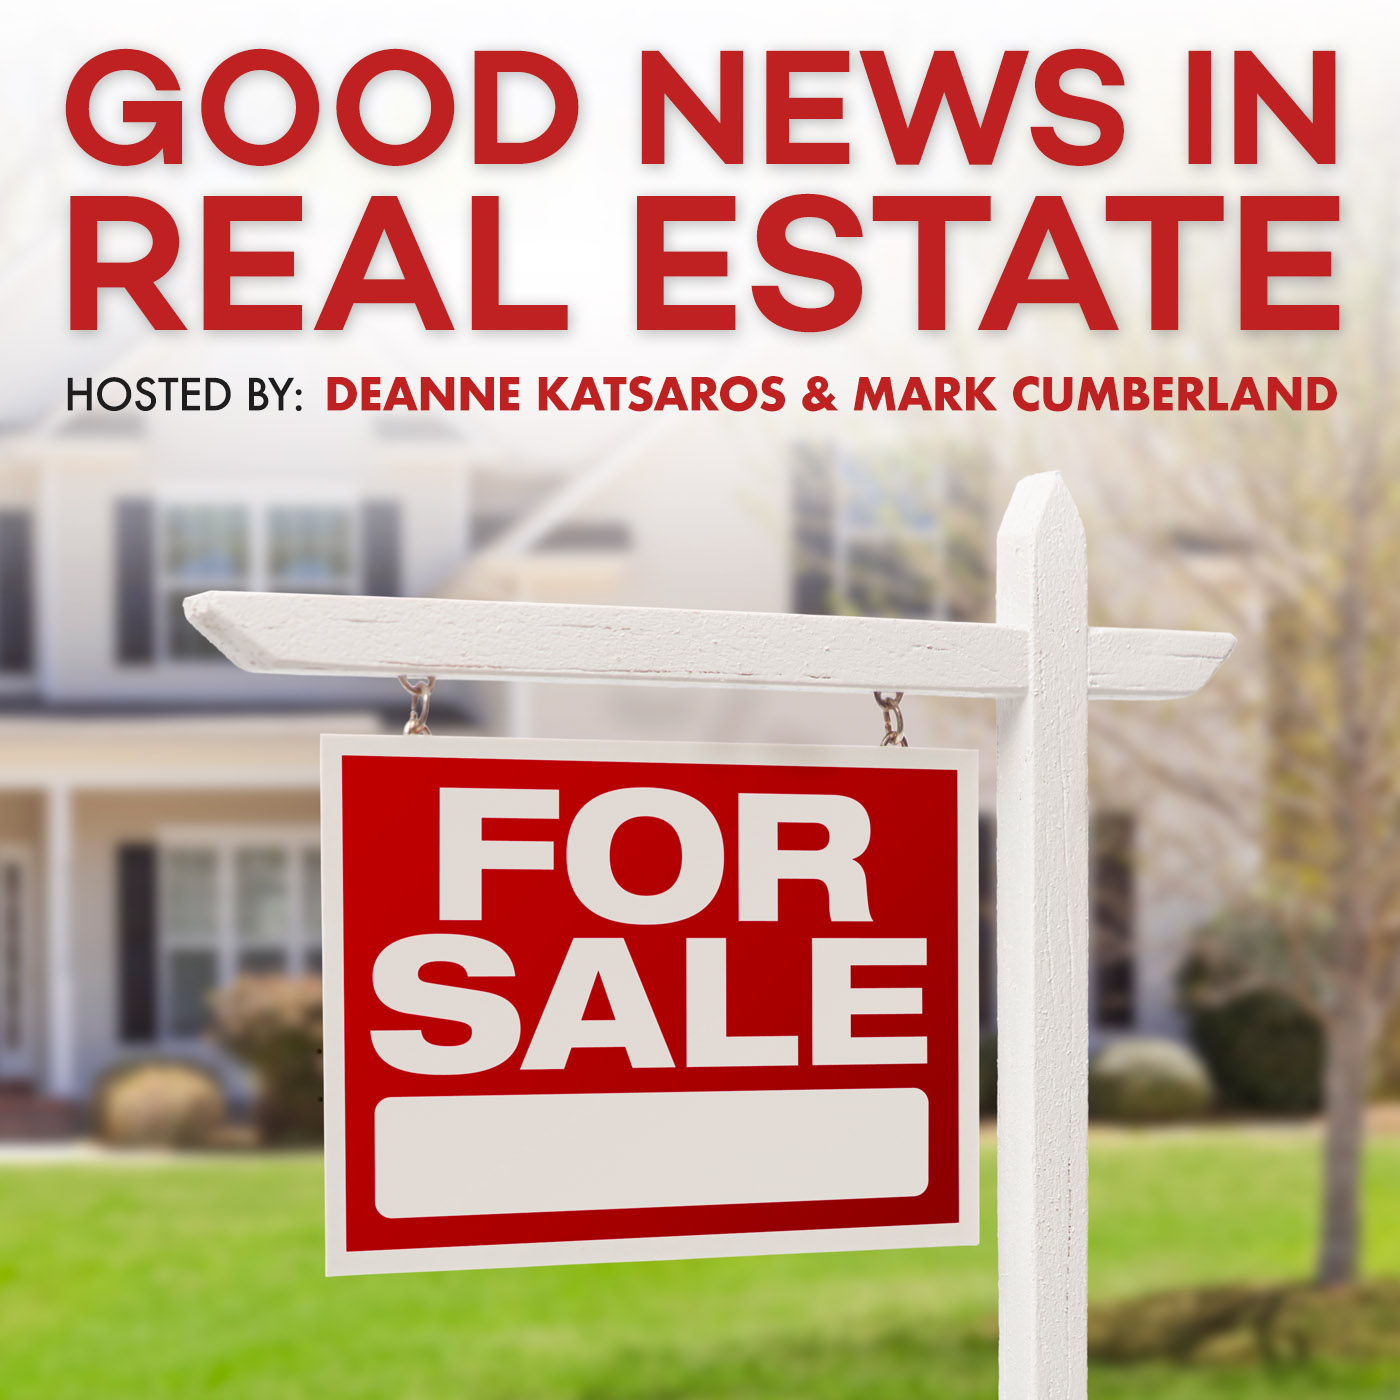 March 6, 2021| Good News in Real Estate